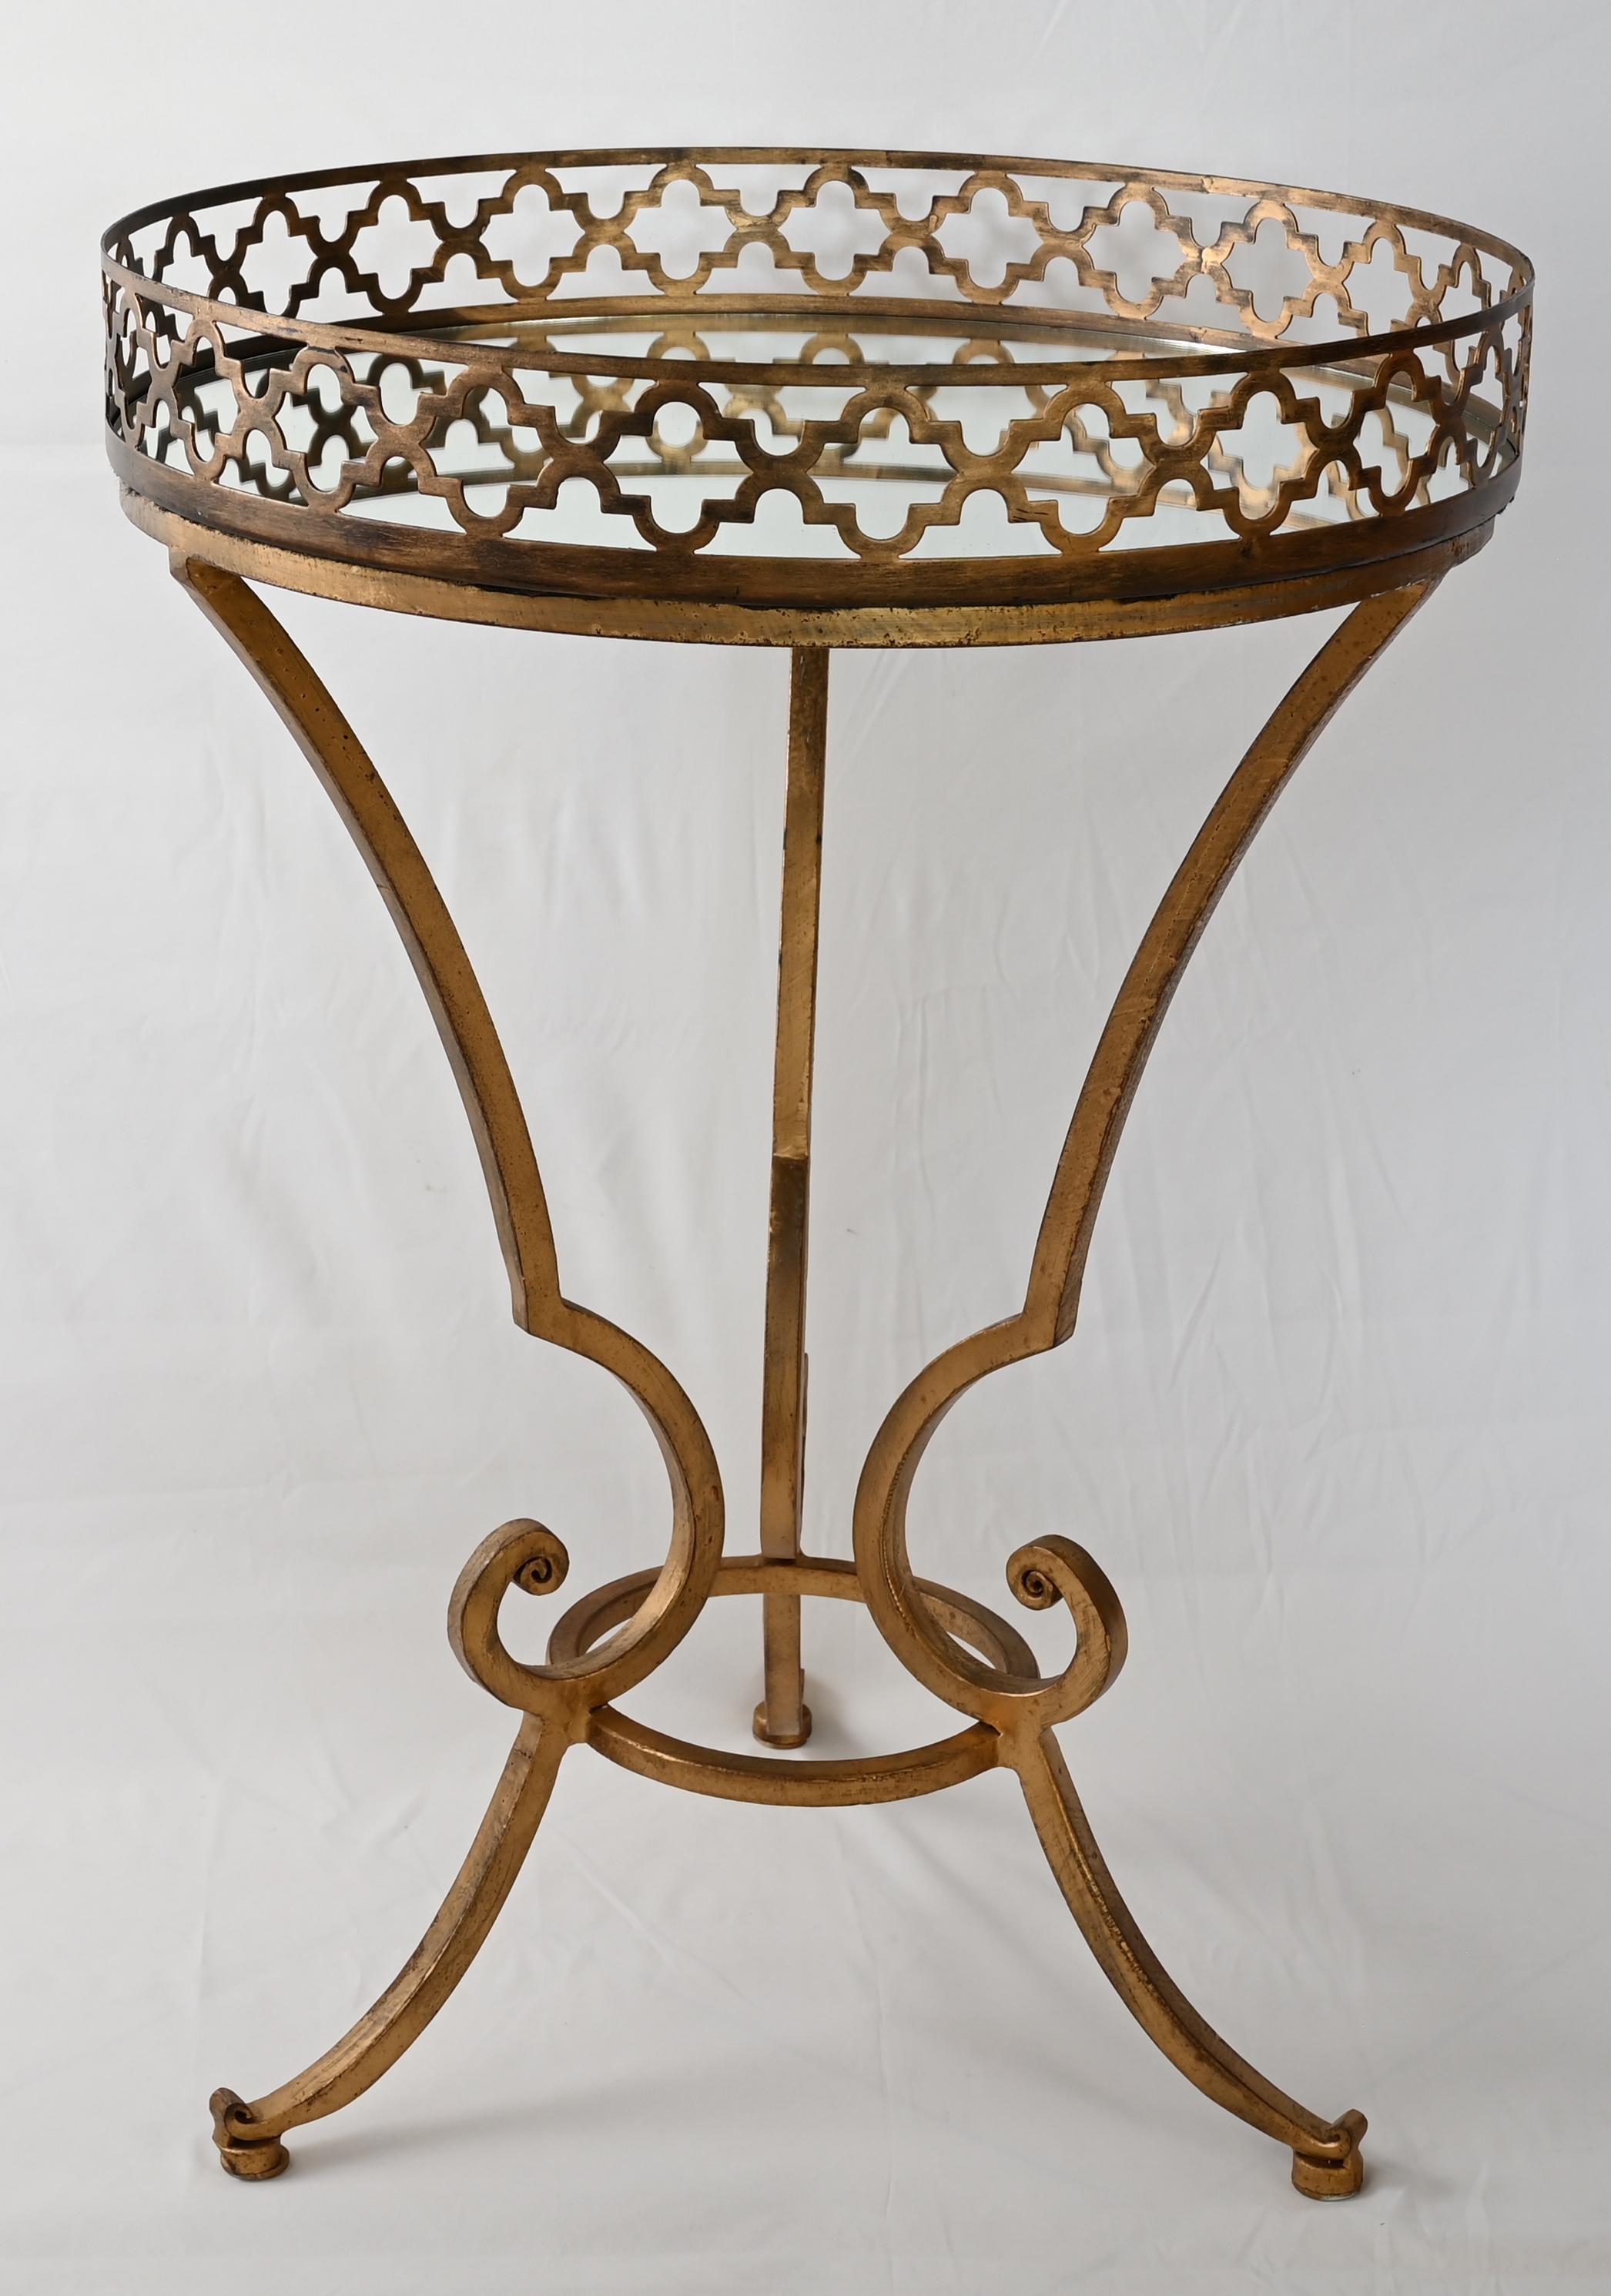 Bronze Hollywood Regency Style Side Table or End Table with Mirrored Top For Sale